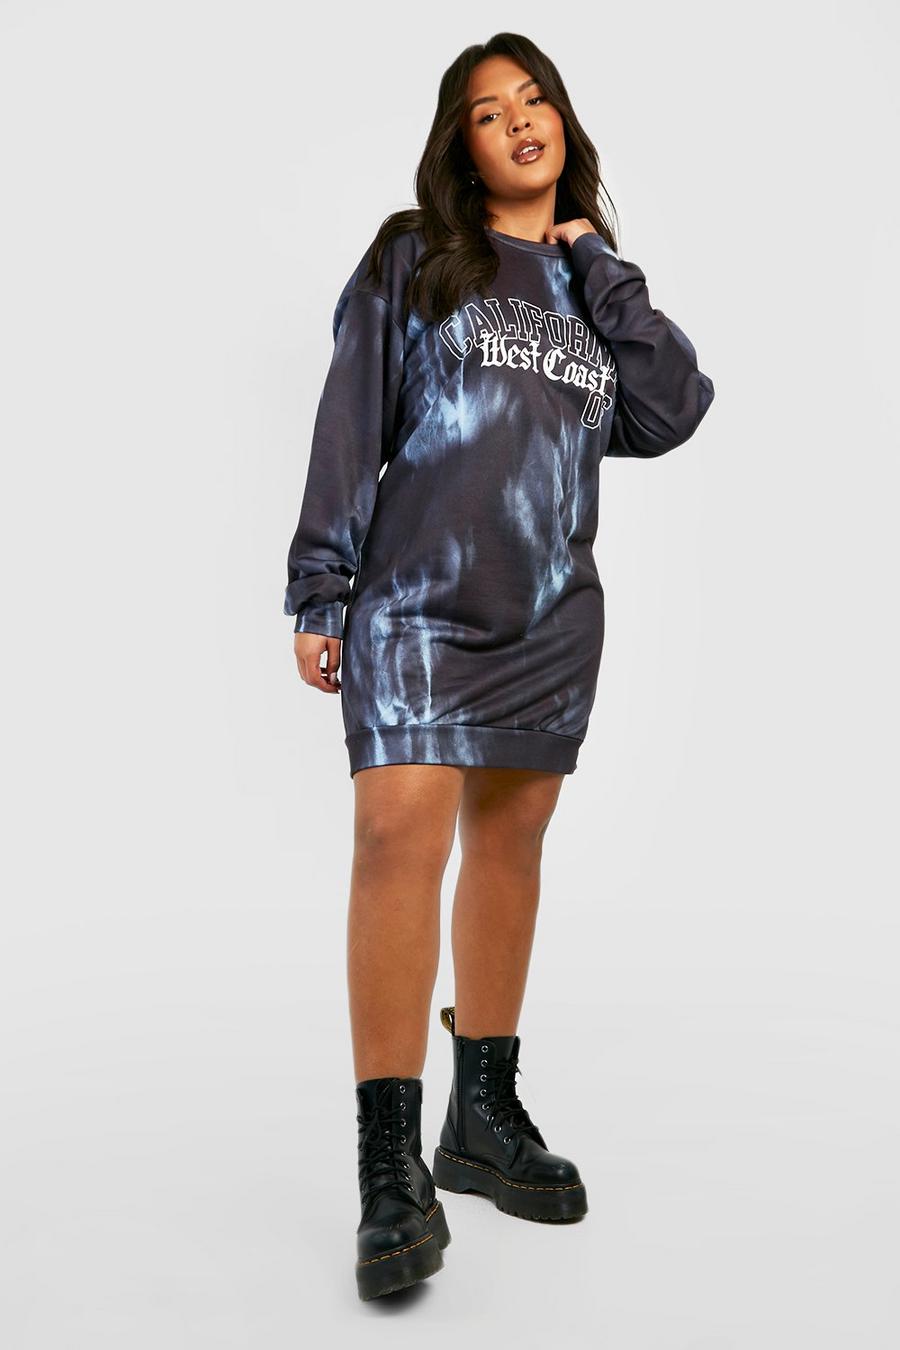 Grande taille - Robe sweat tie dye à slogan California, Charcoal grey image number 1